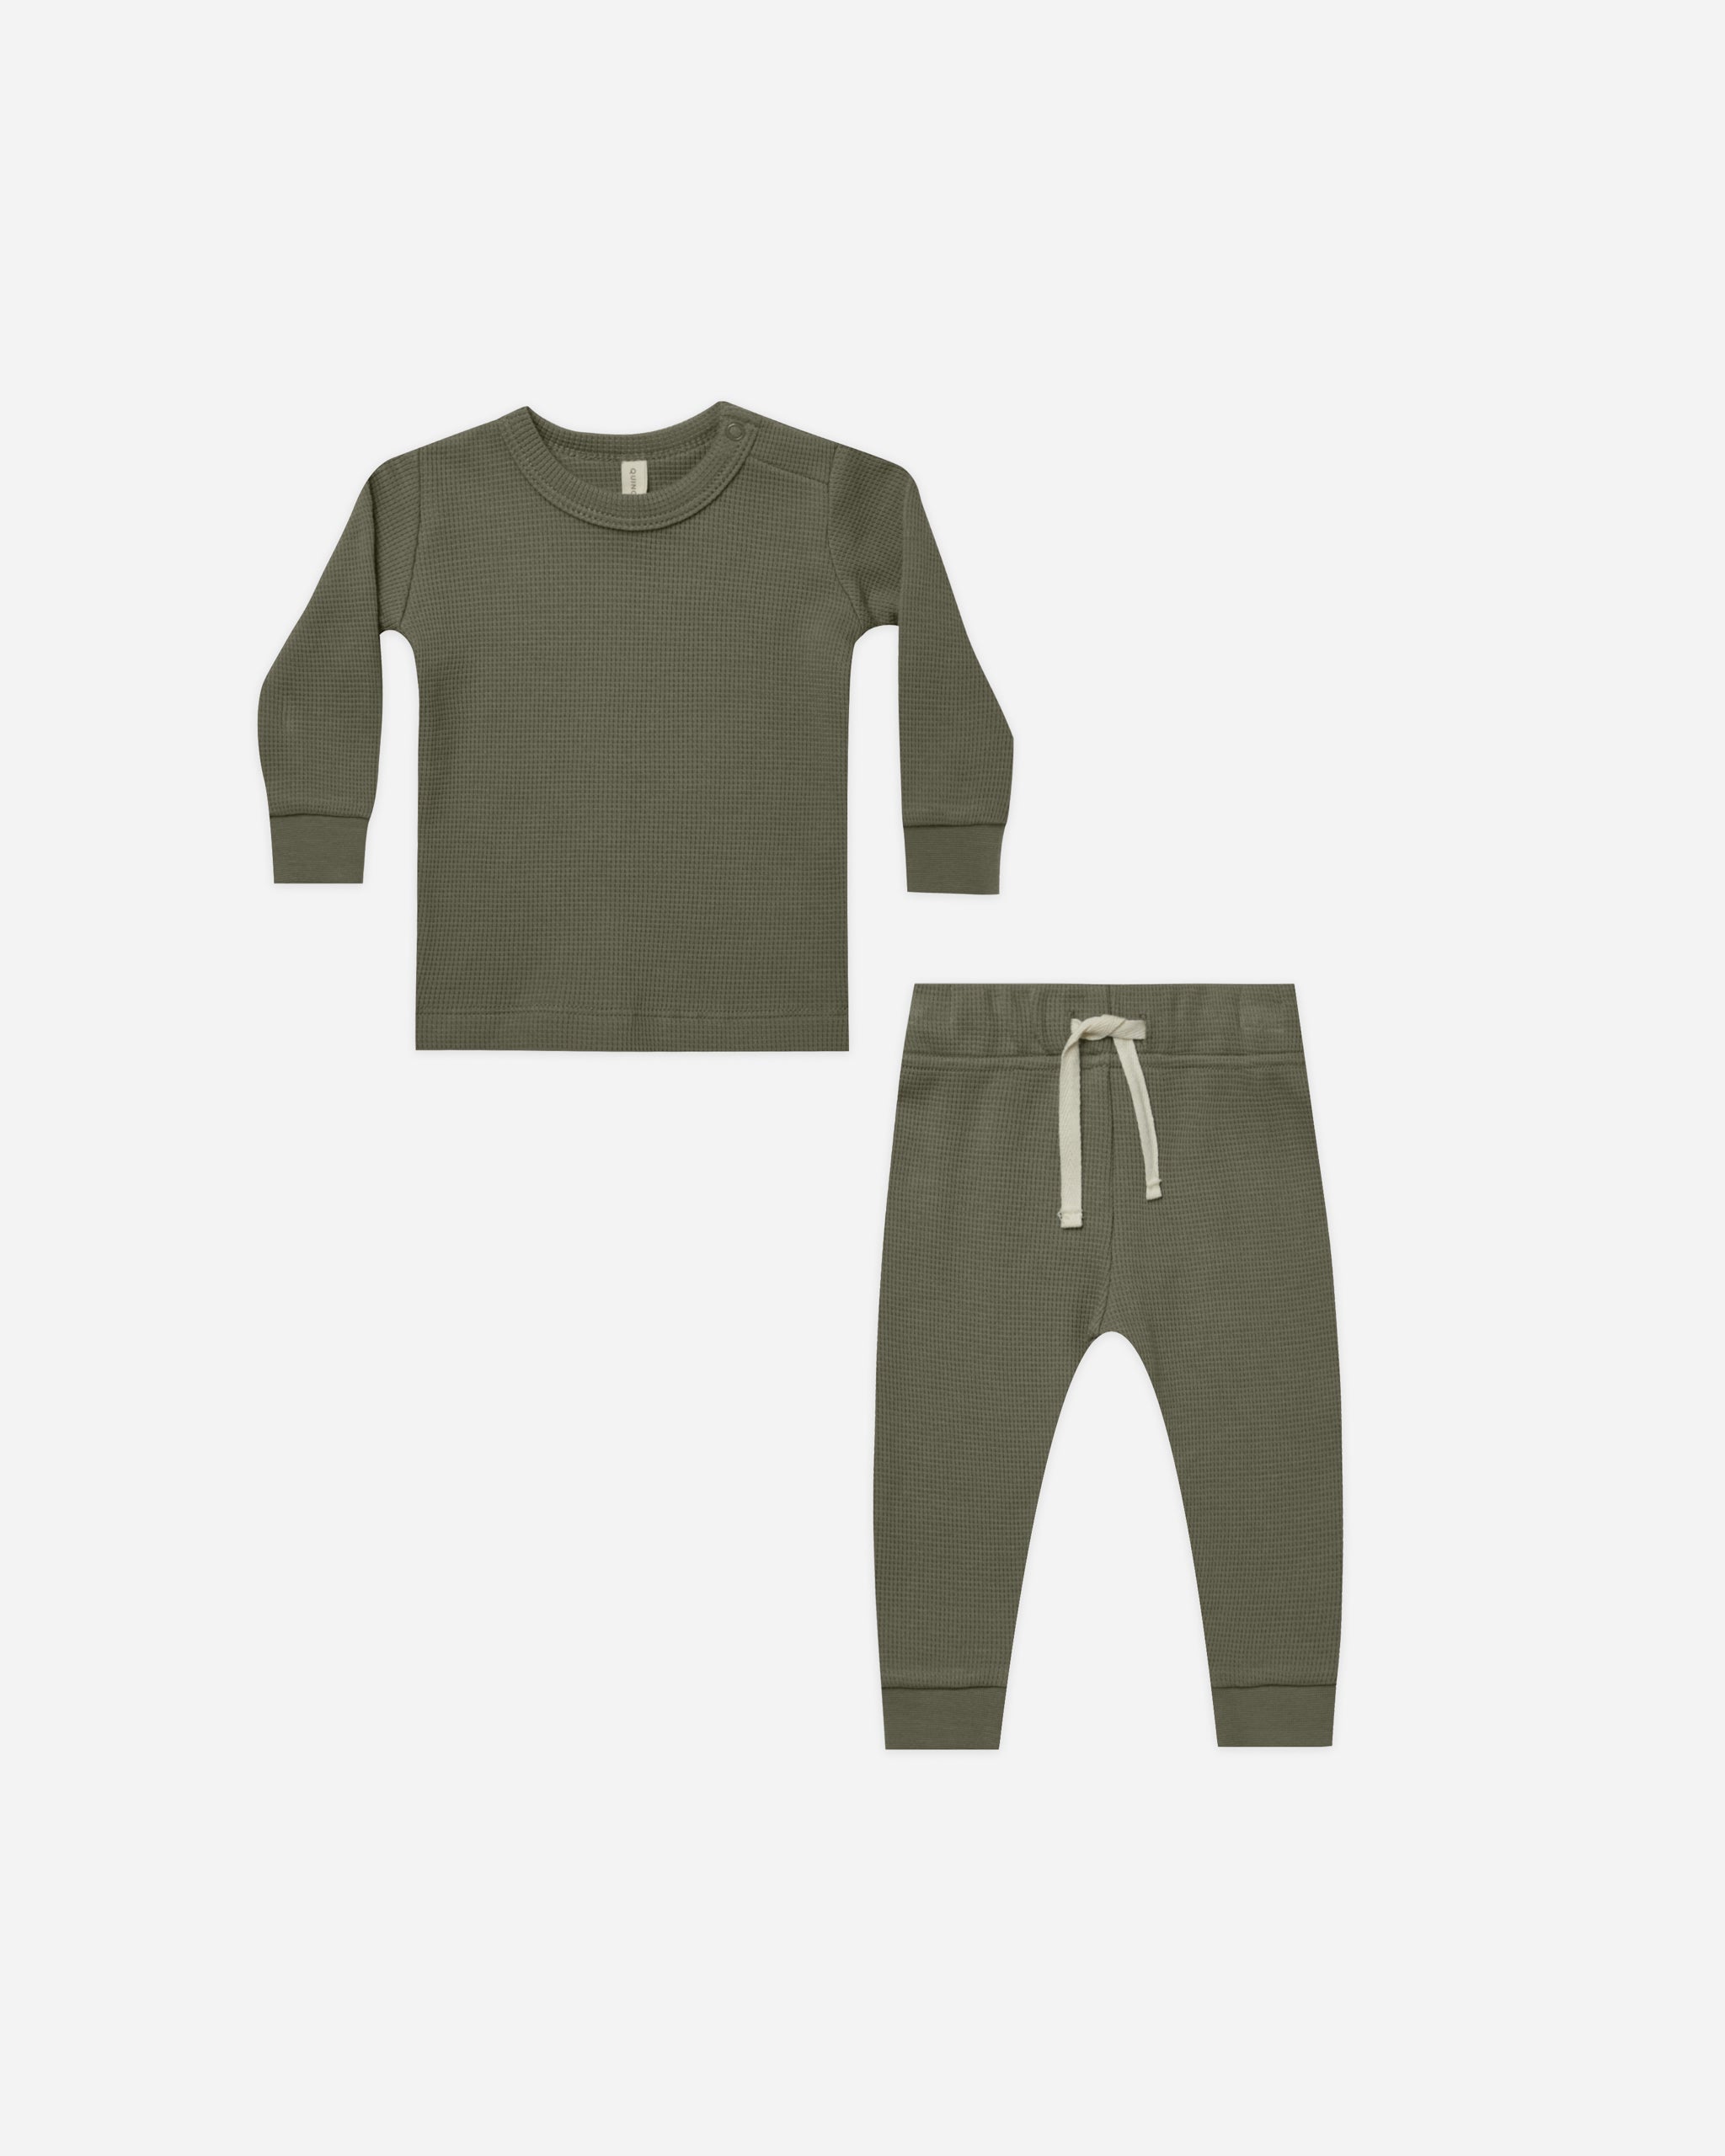 Waffle Top + Pant Set || Forest - Rylee + Cru | Kids Clothes | Trendy Baby Clothes | Modern Infant Outfits |